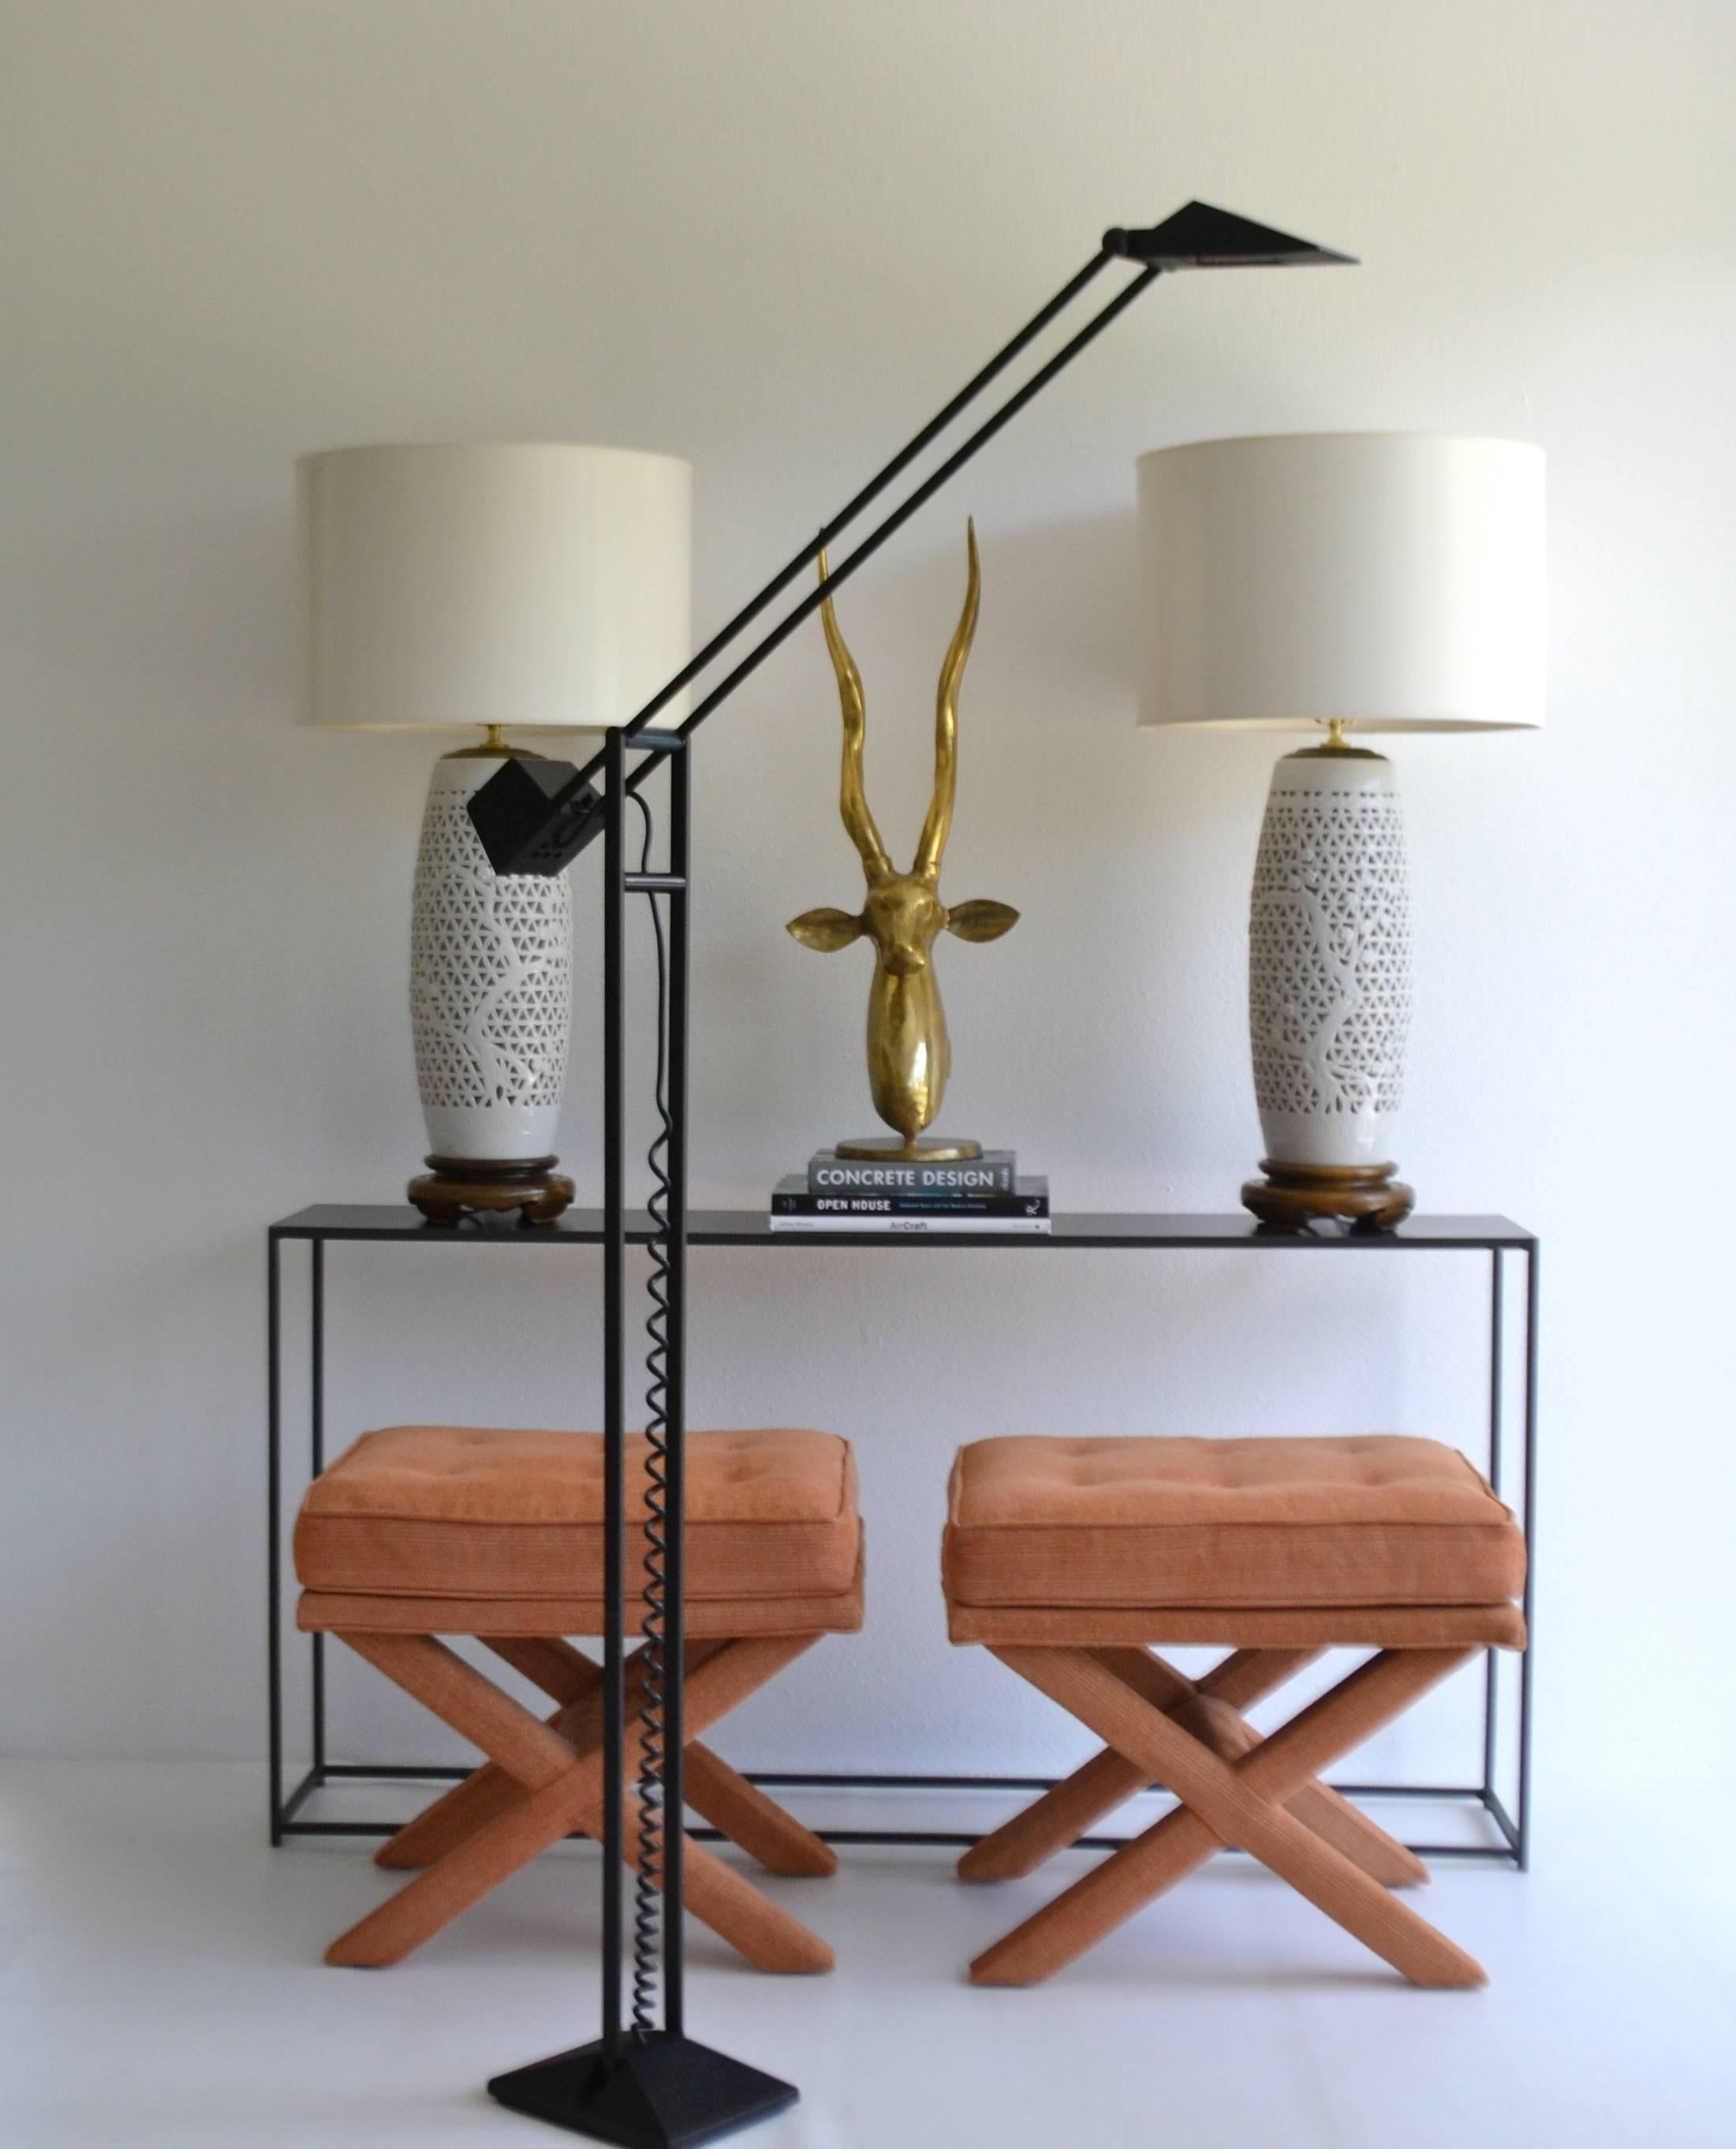 Architectural Postmodern articulated floor lamp by Artup, circa 1980s. This sculptural and graphic Memphis style black lacquered steel and cast iron standing lamp is designed with numerous articulating pivot points allowing for various